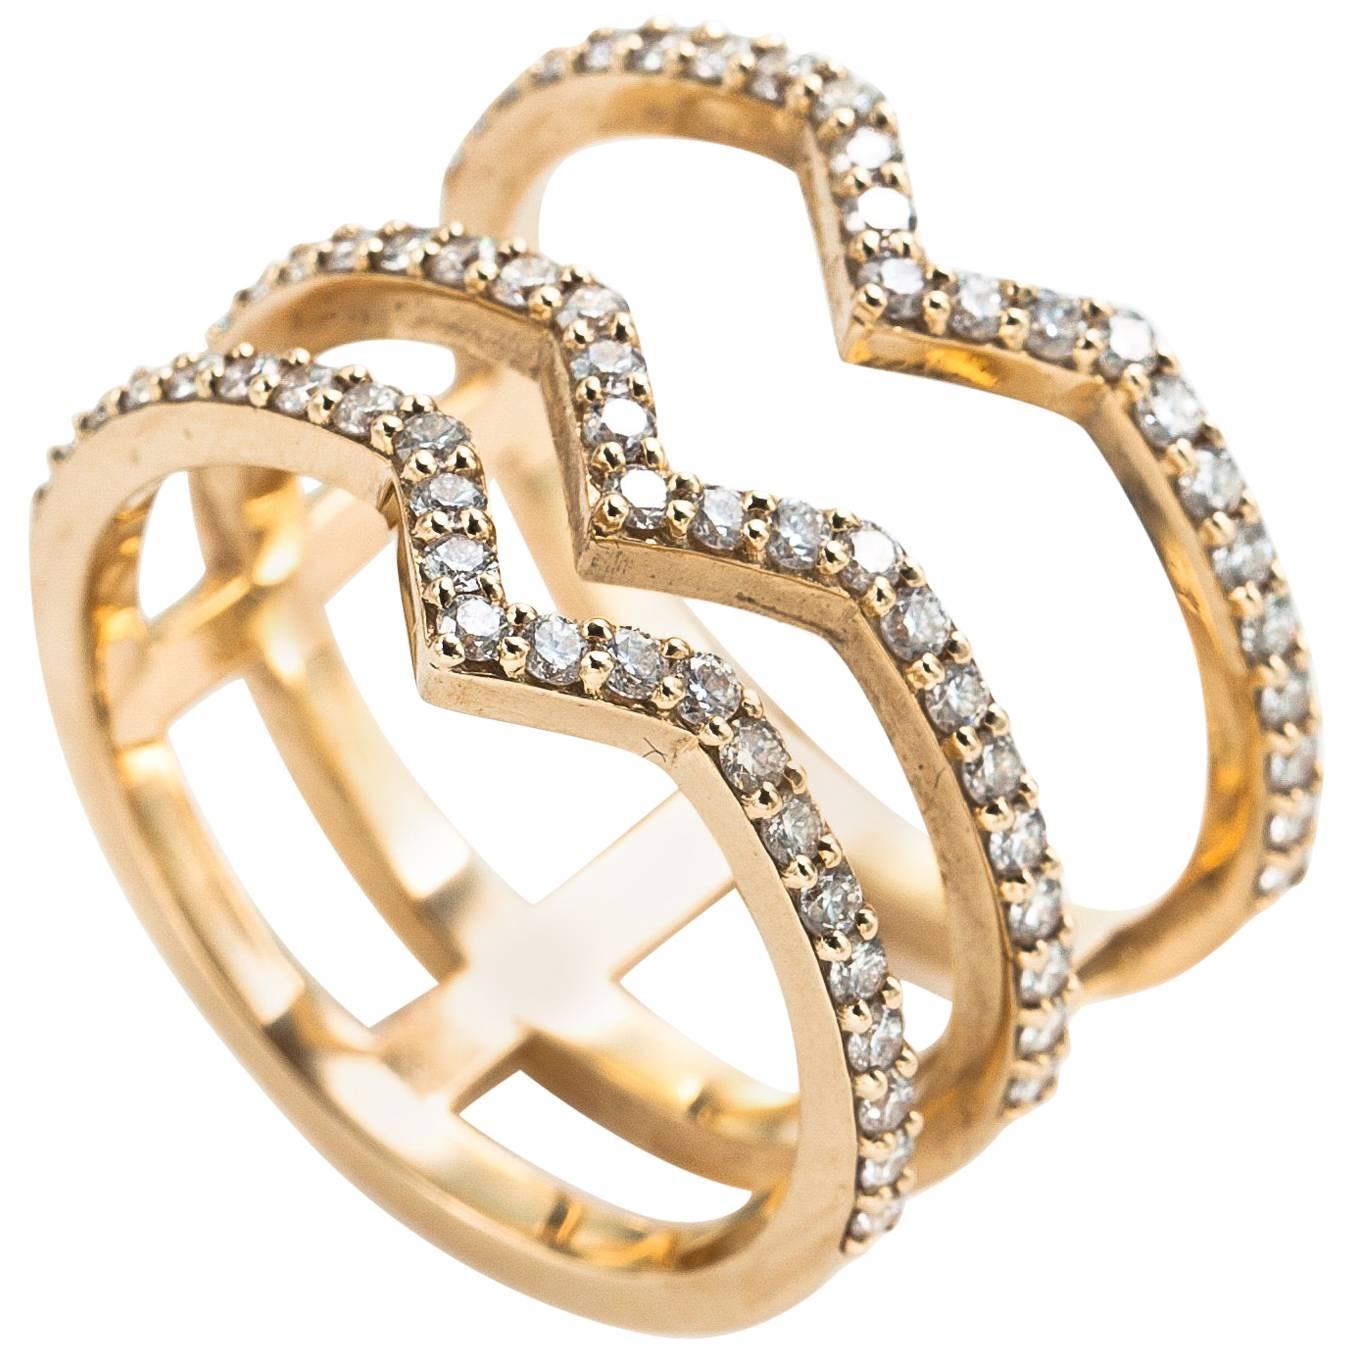 Paige Novick Elisabeth Yellow Gold Three-Bar Kiss Ring with Diamonds Pave  For Sale